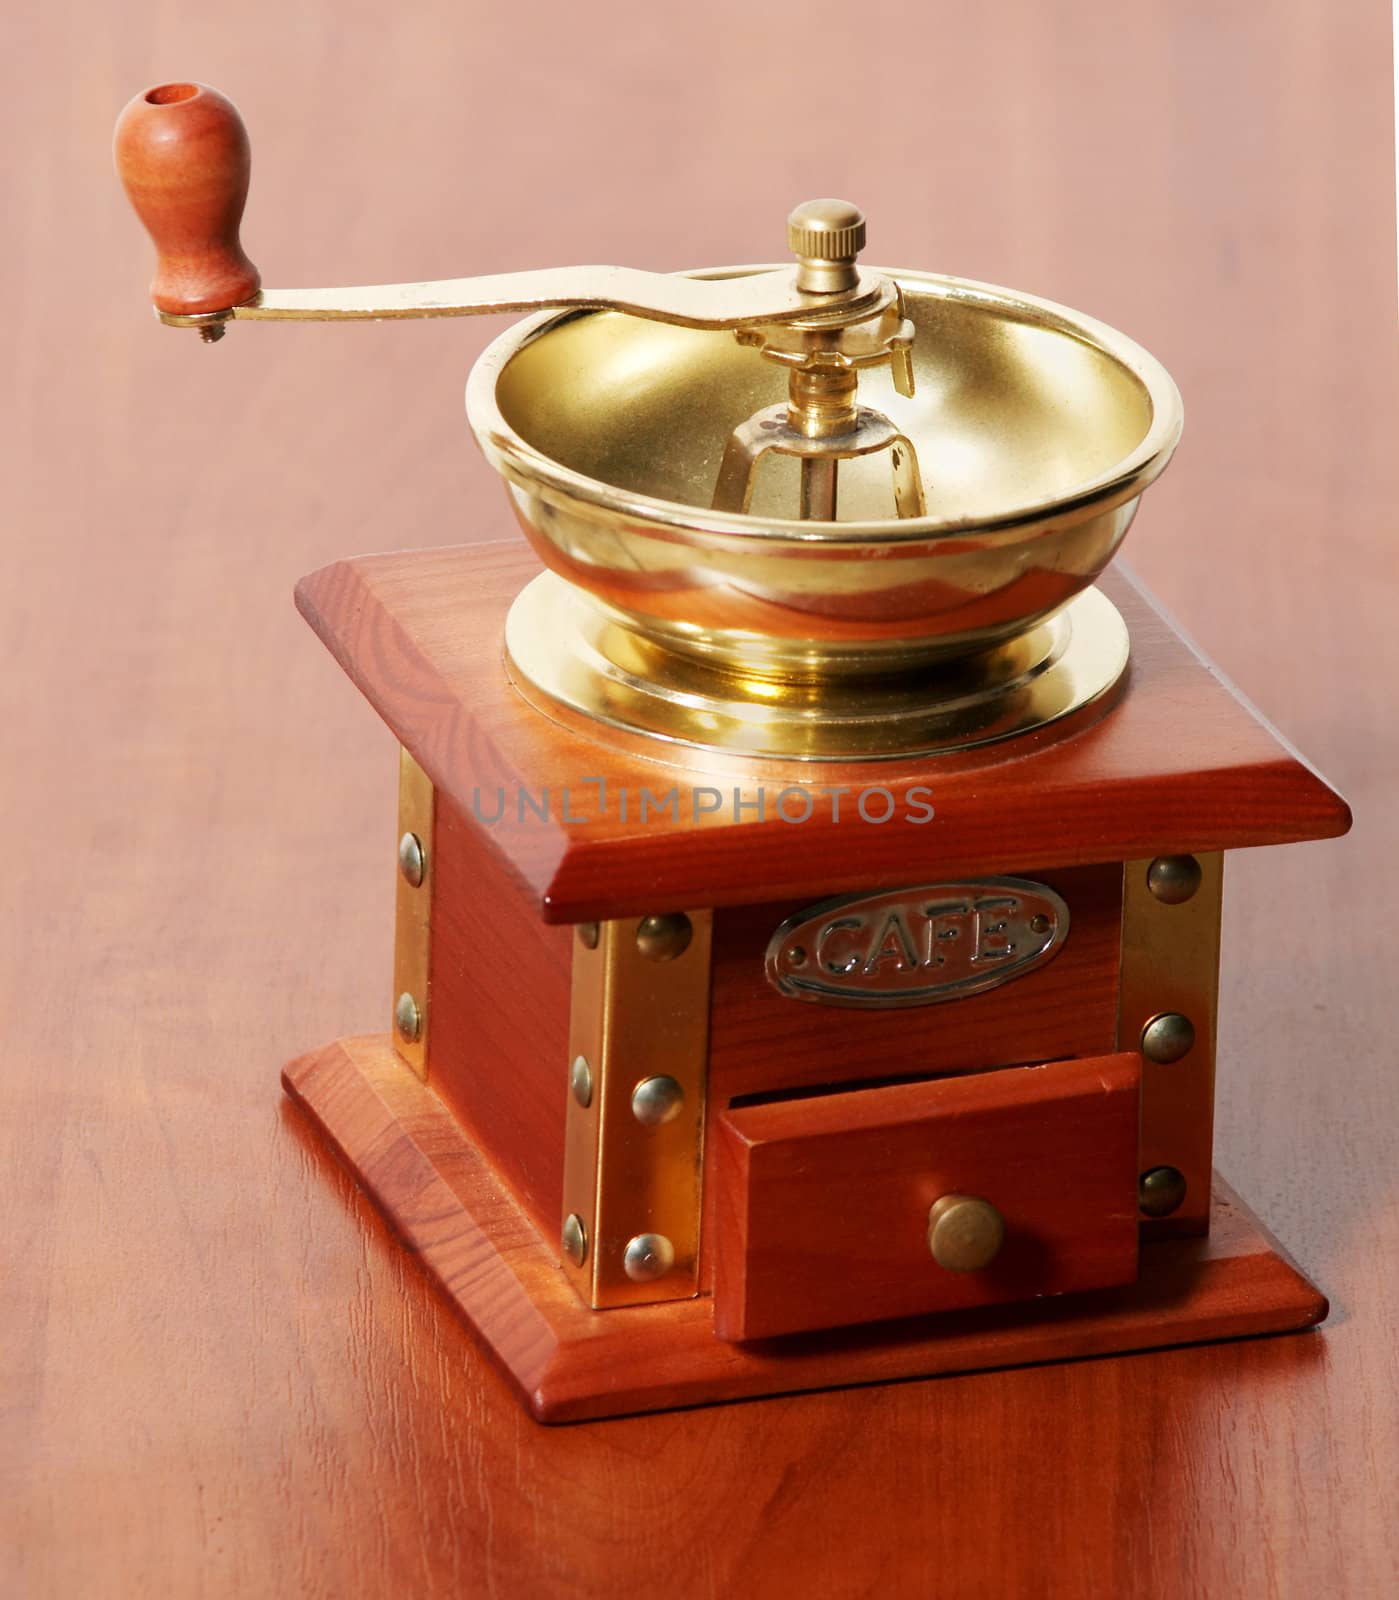 An image of antique coffee mill